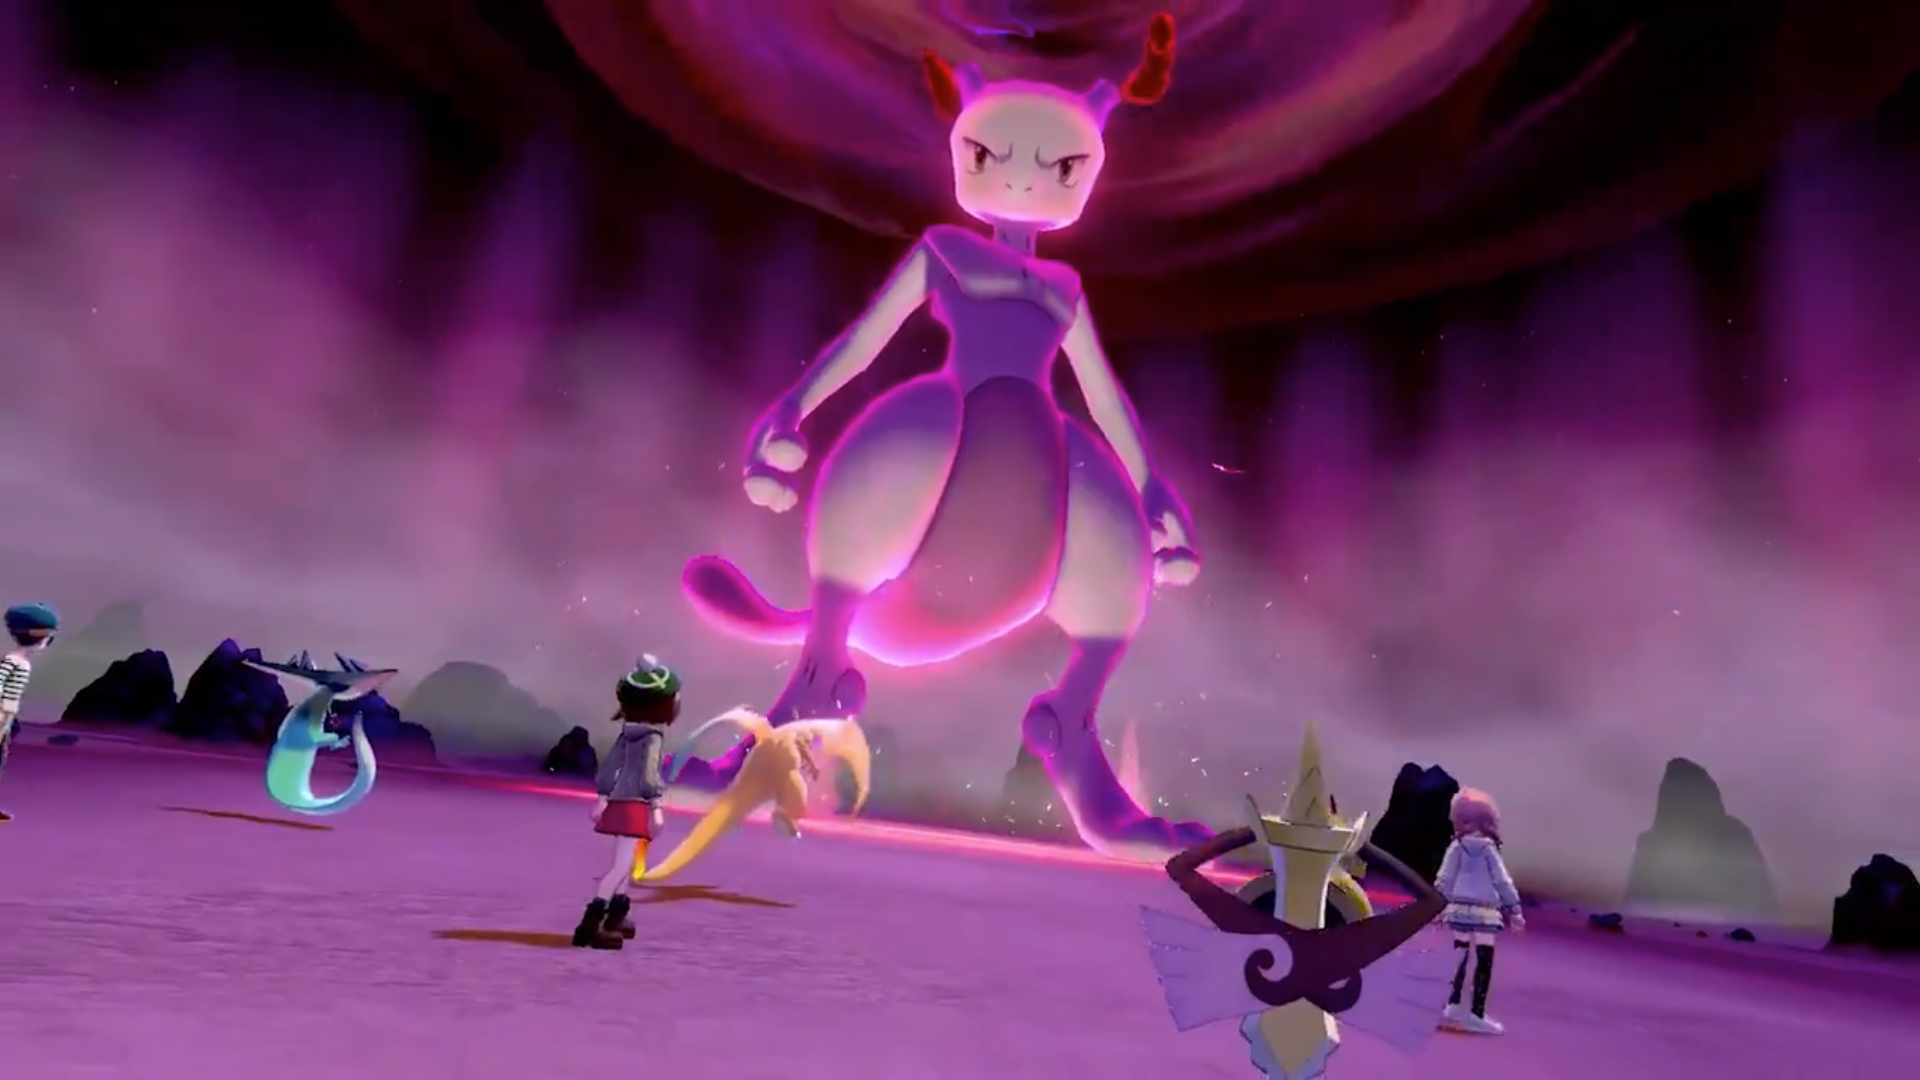 Mewtwo appearing as a raid boss at Pokemon GO event in Japan